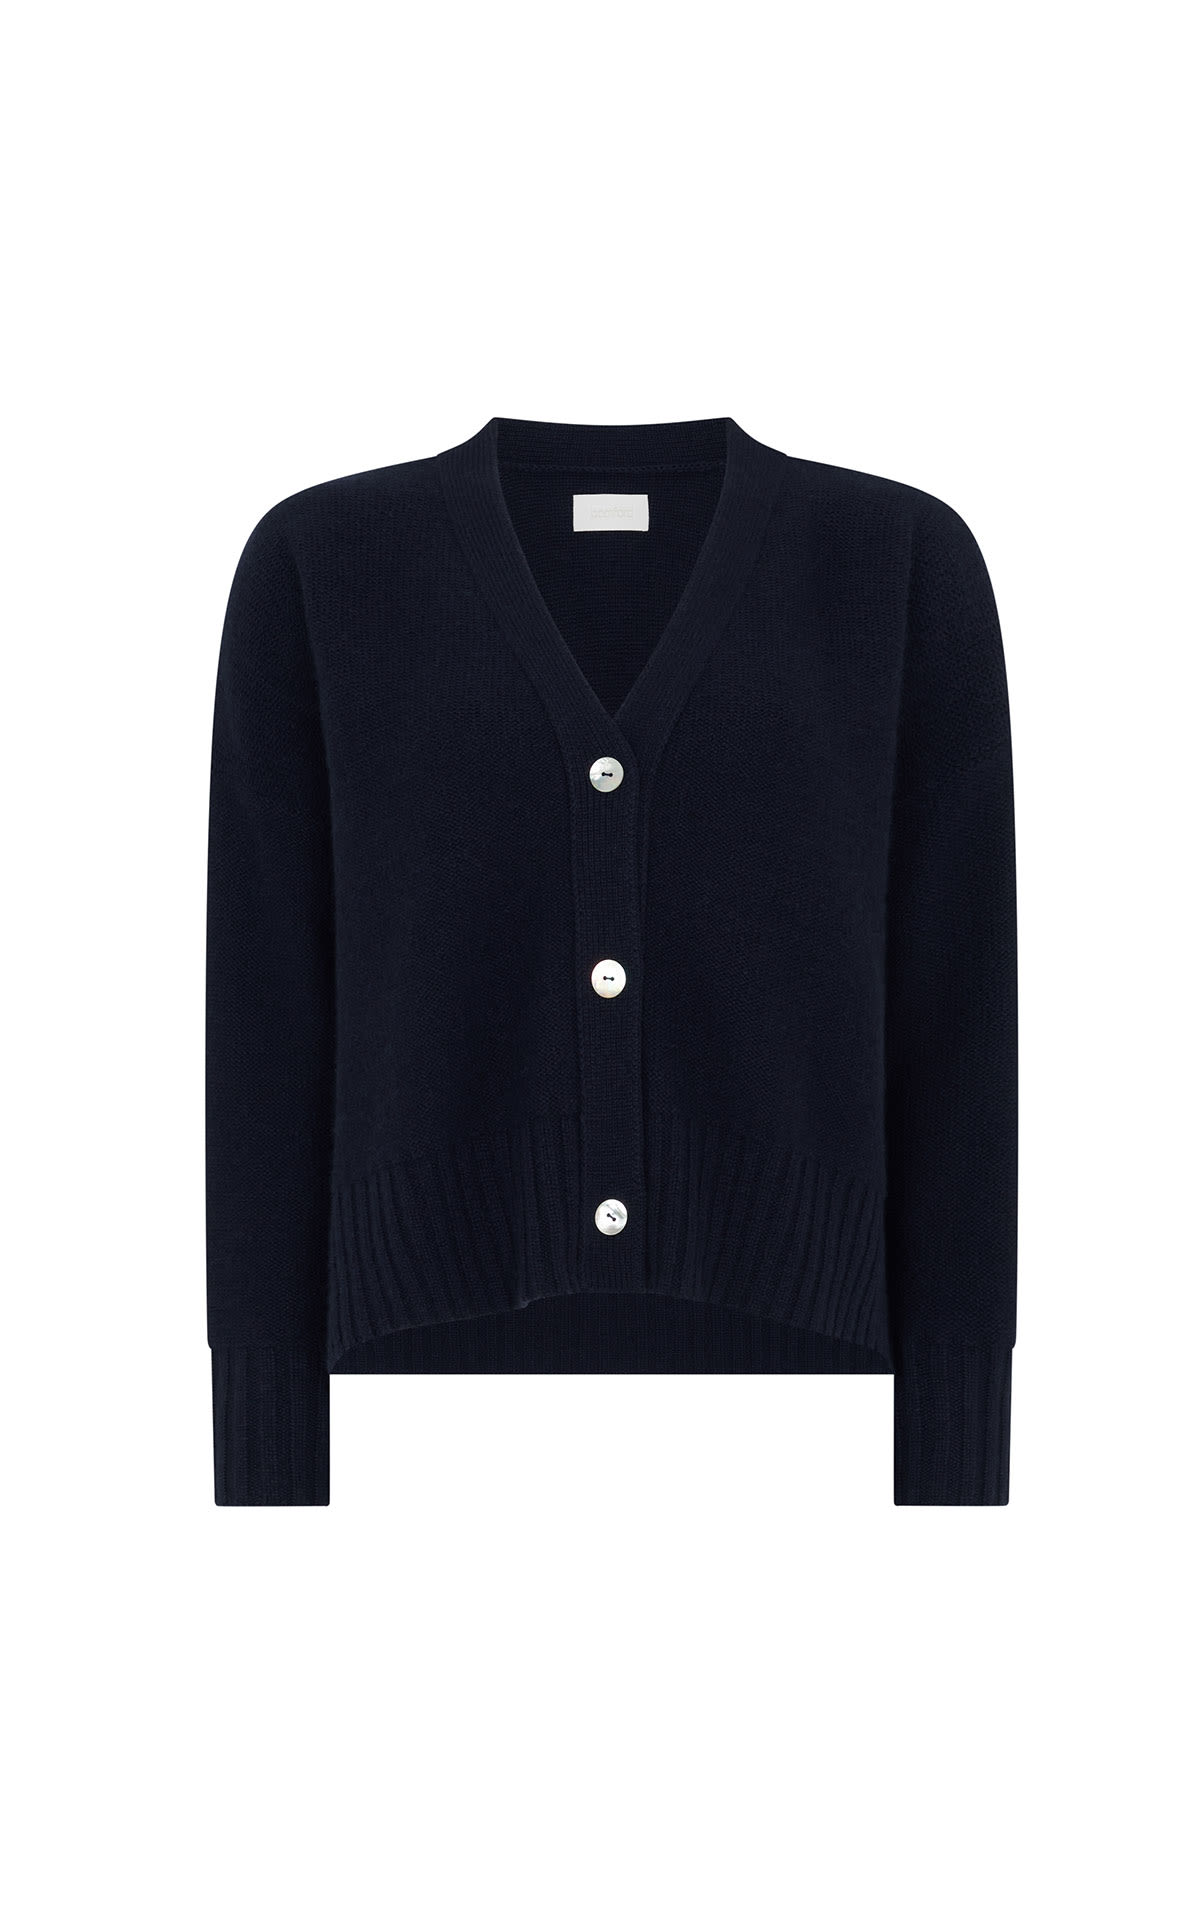 Bamford Lily cardigan navy from Bicester Village